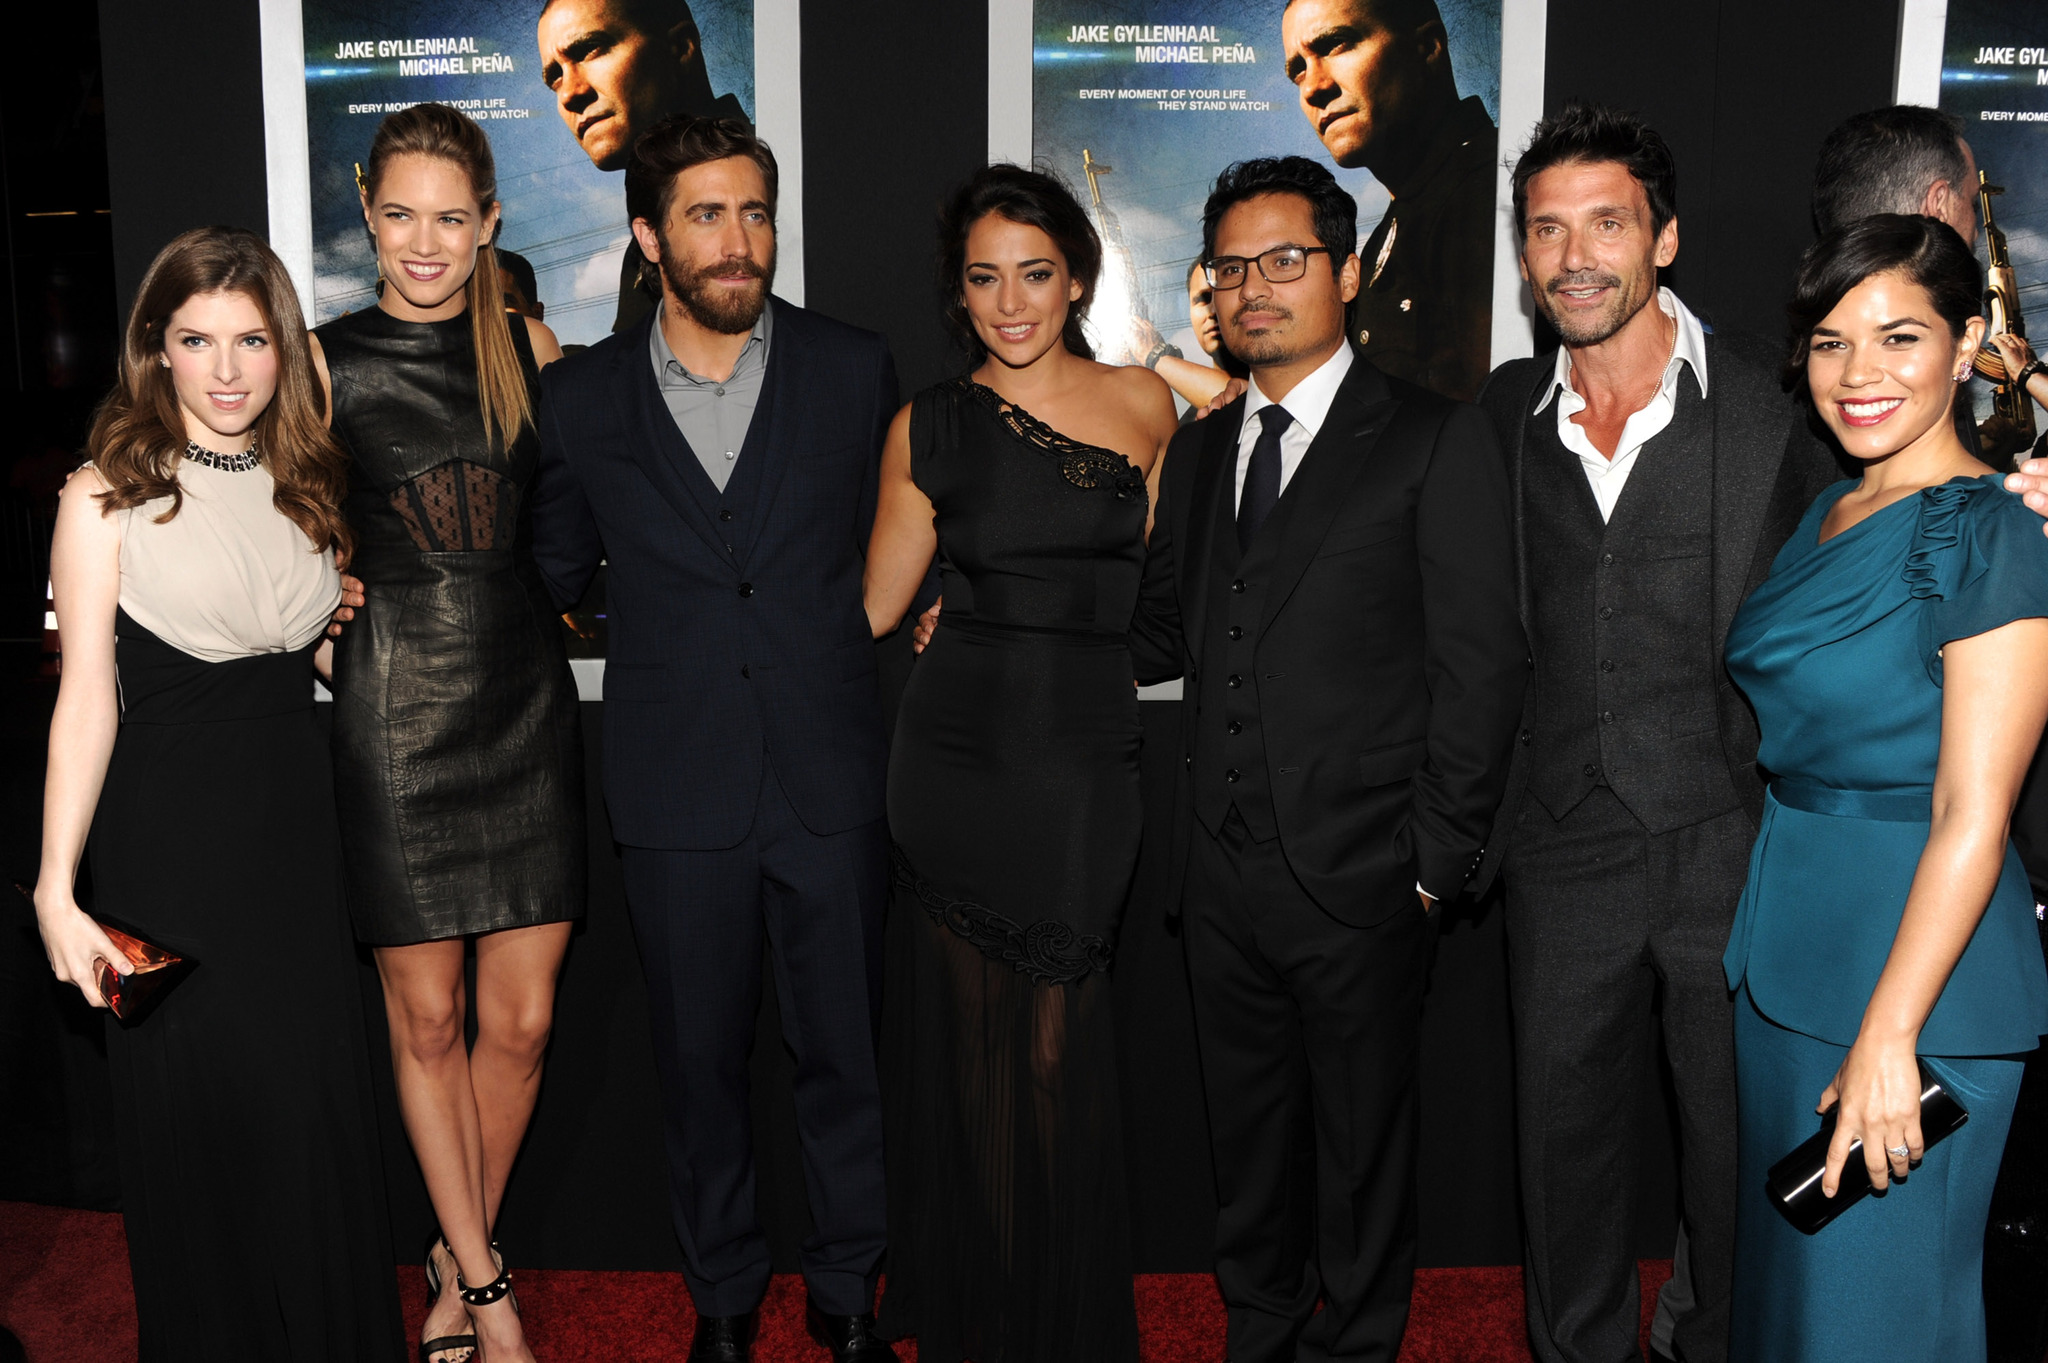 Frank Grillo, Jake Gyllenhaal, Anna Kendrick, Michael Peña, America Ferrera, Natalie Martinez and Cody Horn at event of End of Watch (2012)